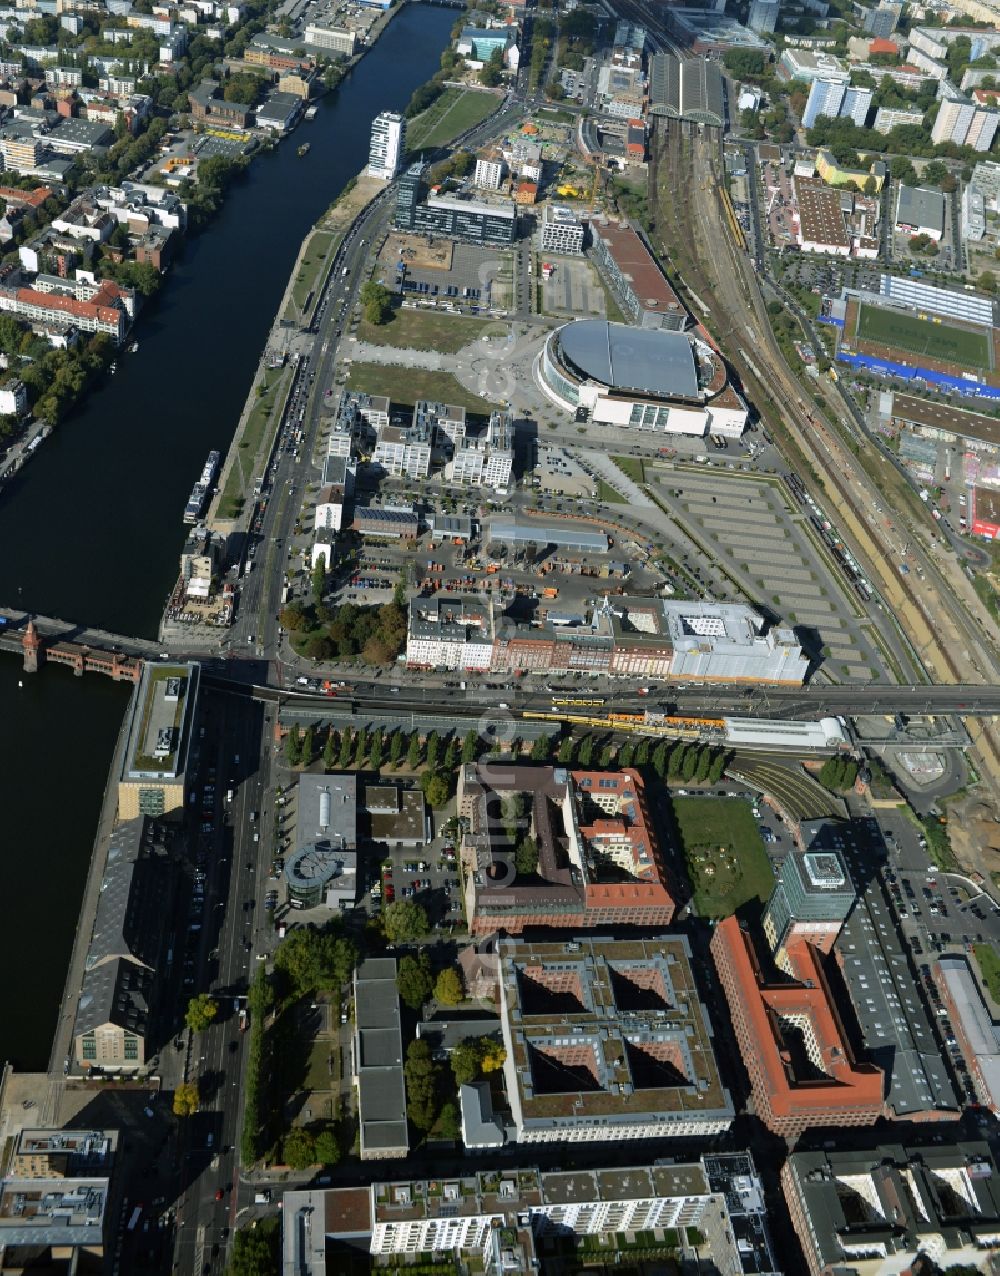 Aerial photograph Berlin - View at the restored building of the monument protected former Osram respectively Narva company premises Oberbaum City in the district Friedrichshain in Berlin. Here, among many other companies, BASF Services Europe, the German Post Customer Service Center GmbH and Heineken Germany GmbH are located. It is owned by HVB Immobilien AG, which is part of the UniCredit Group